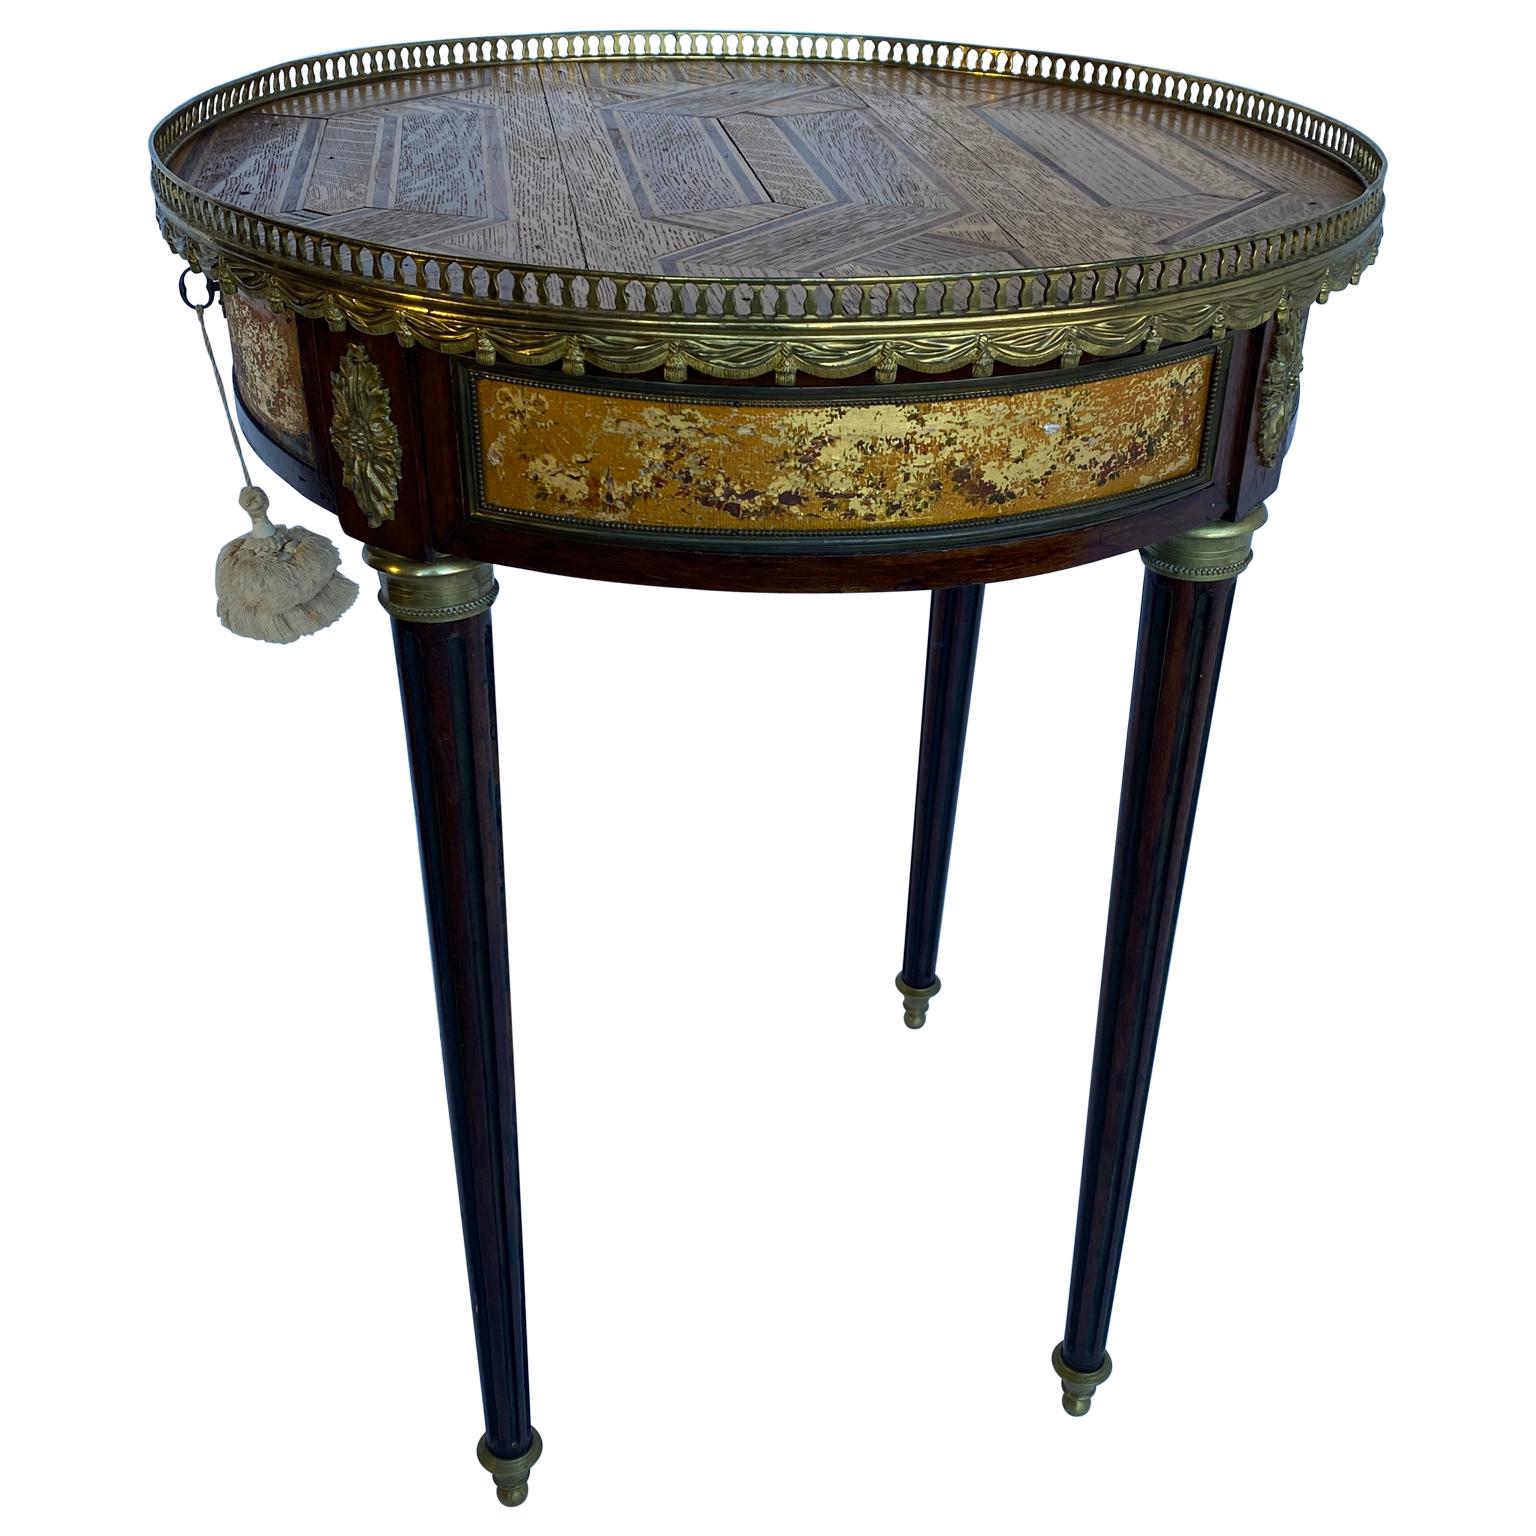 This French antique Bouillotte table has the amazing Versailles style parquet panel tabletop in stead of the usual marble tops. The parquet tabletop is protected by a period and apron decorated a gilt brass gallery. The table is further decorated